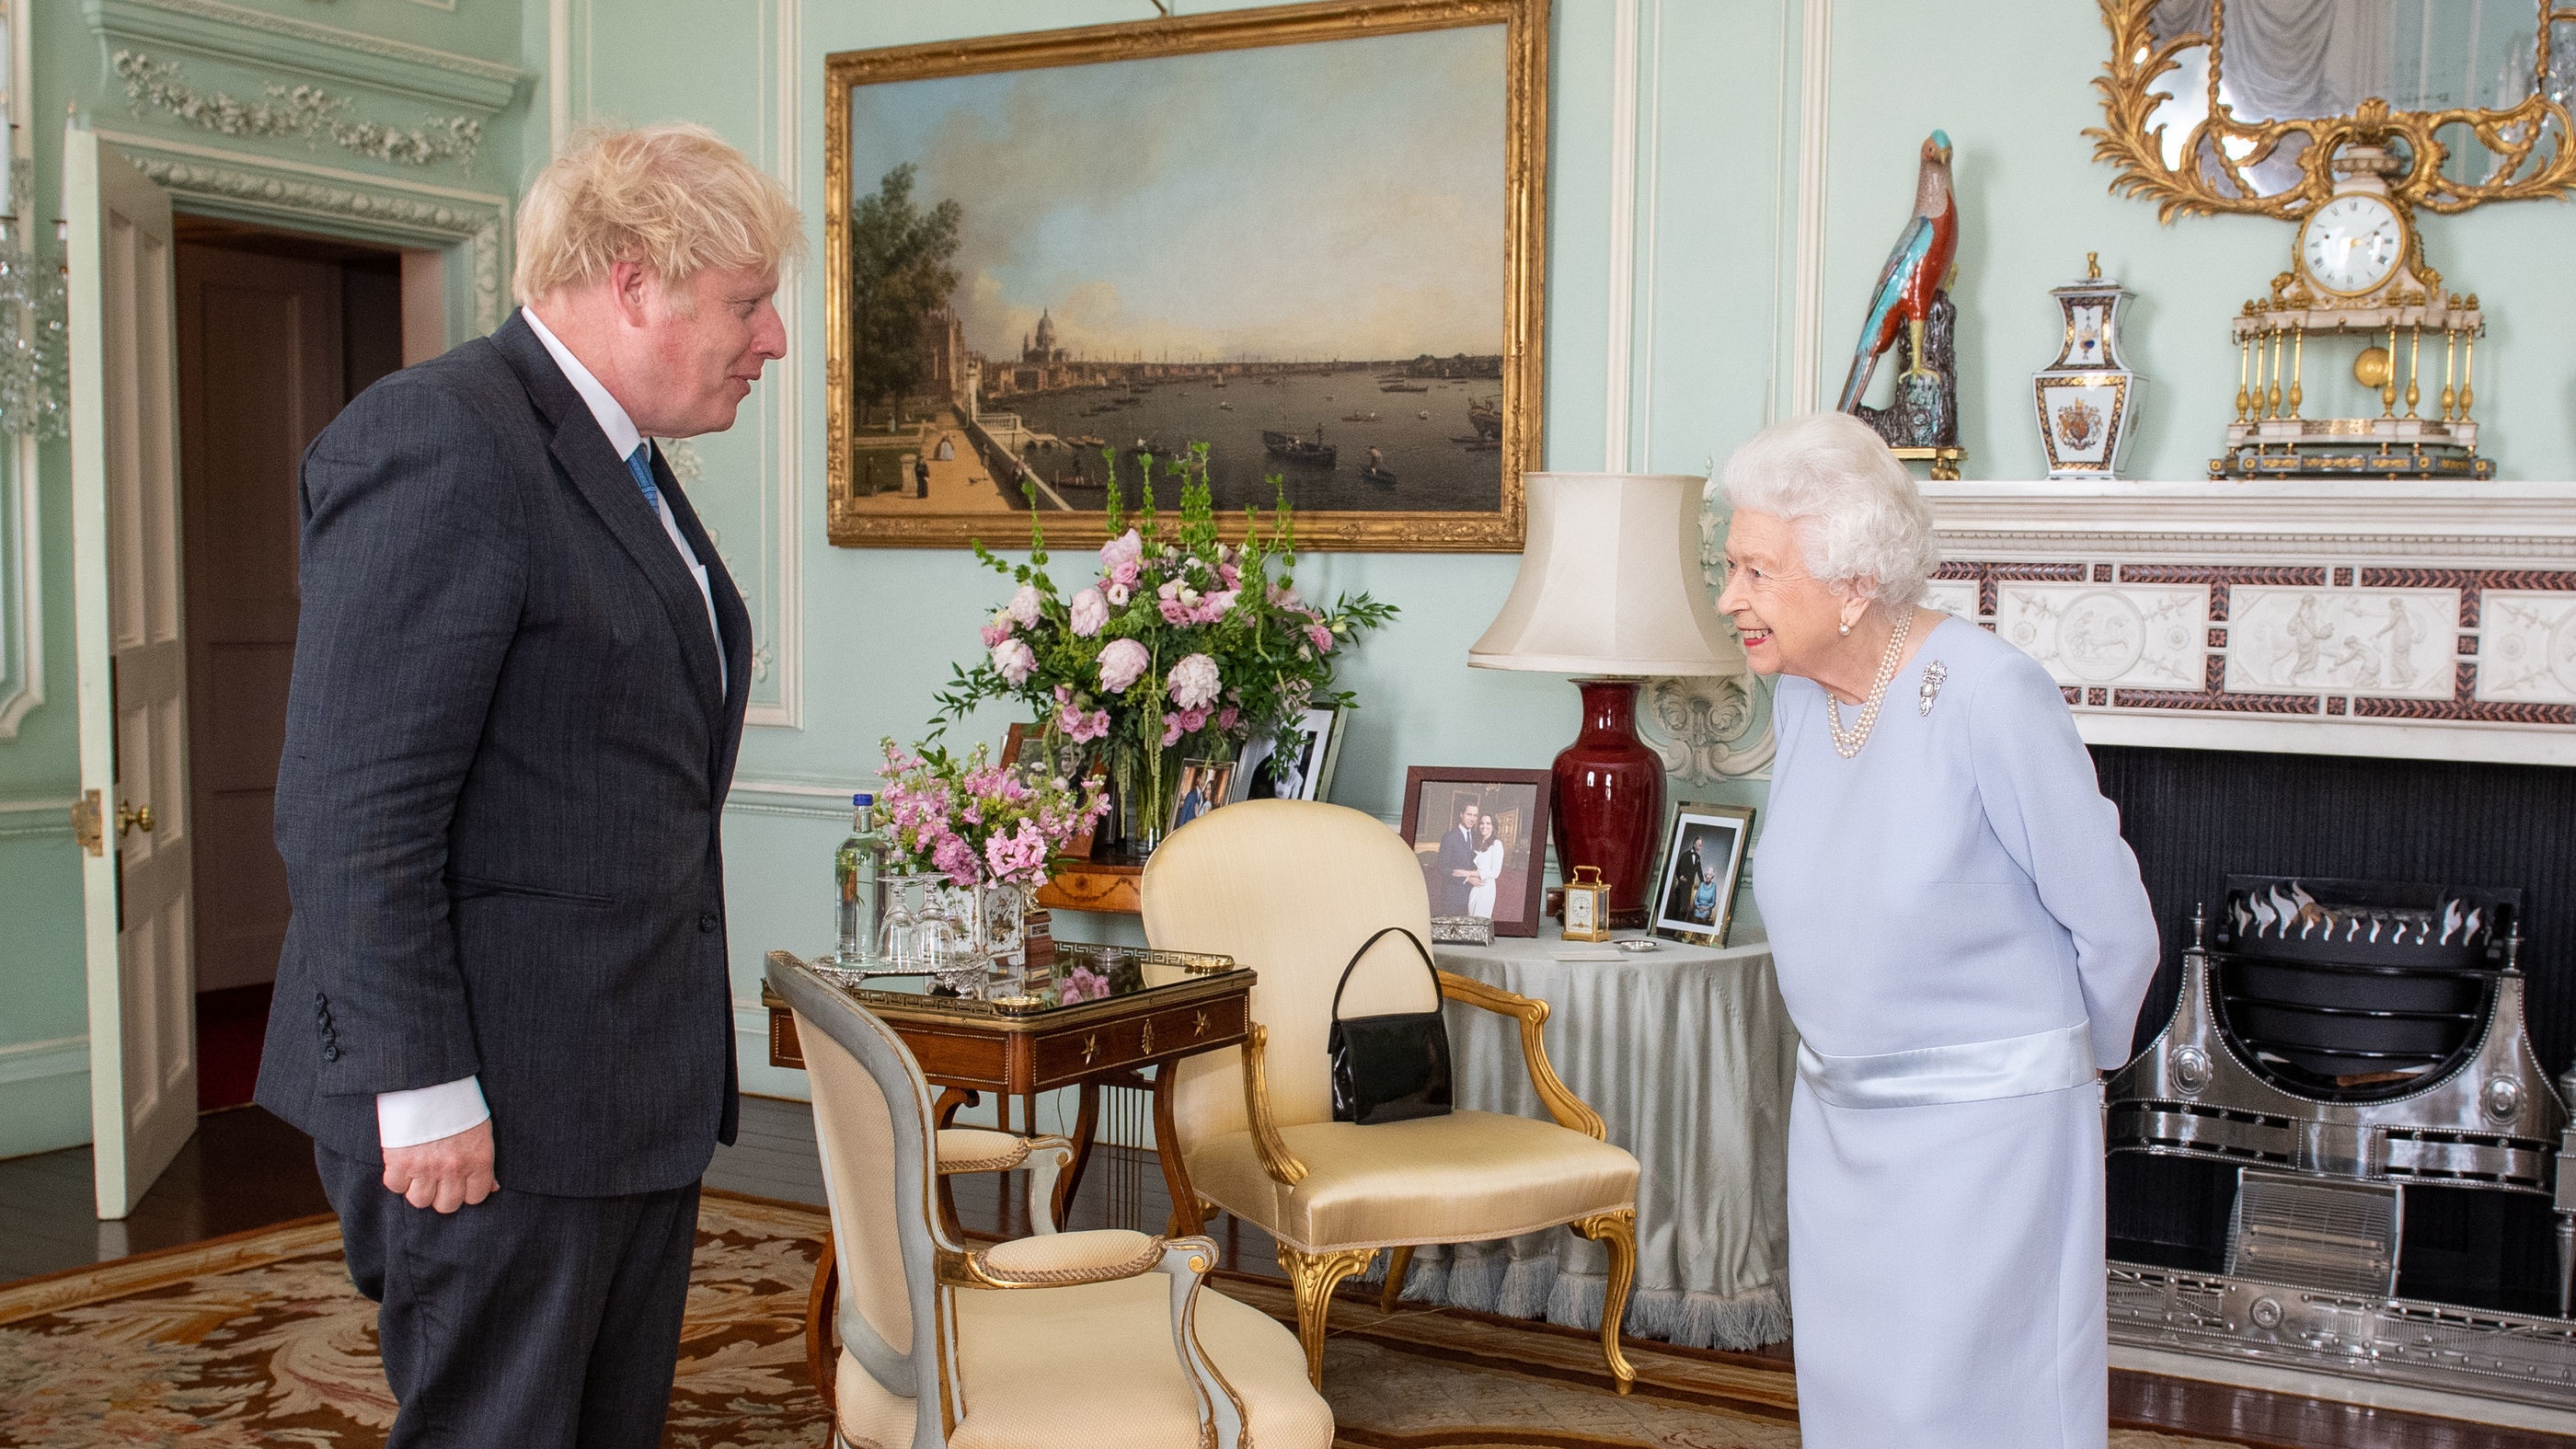 Boris Johnson meets the Queen in person for the first time in 15 months